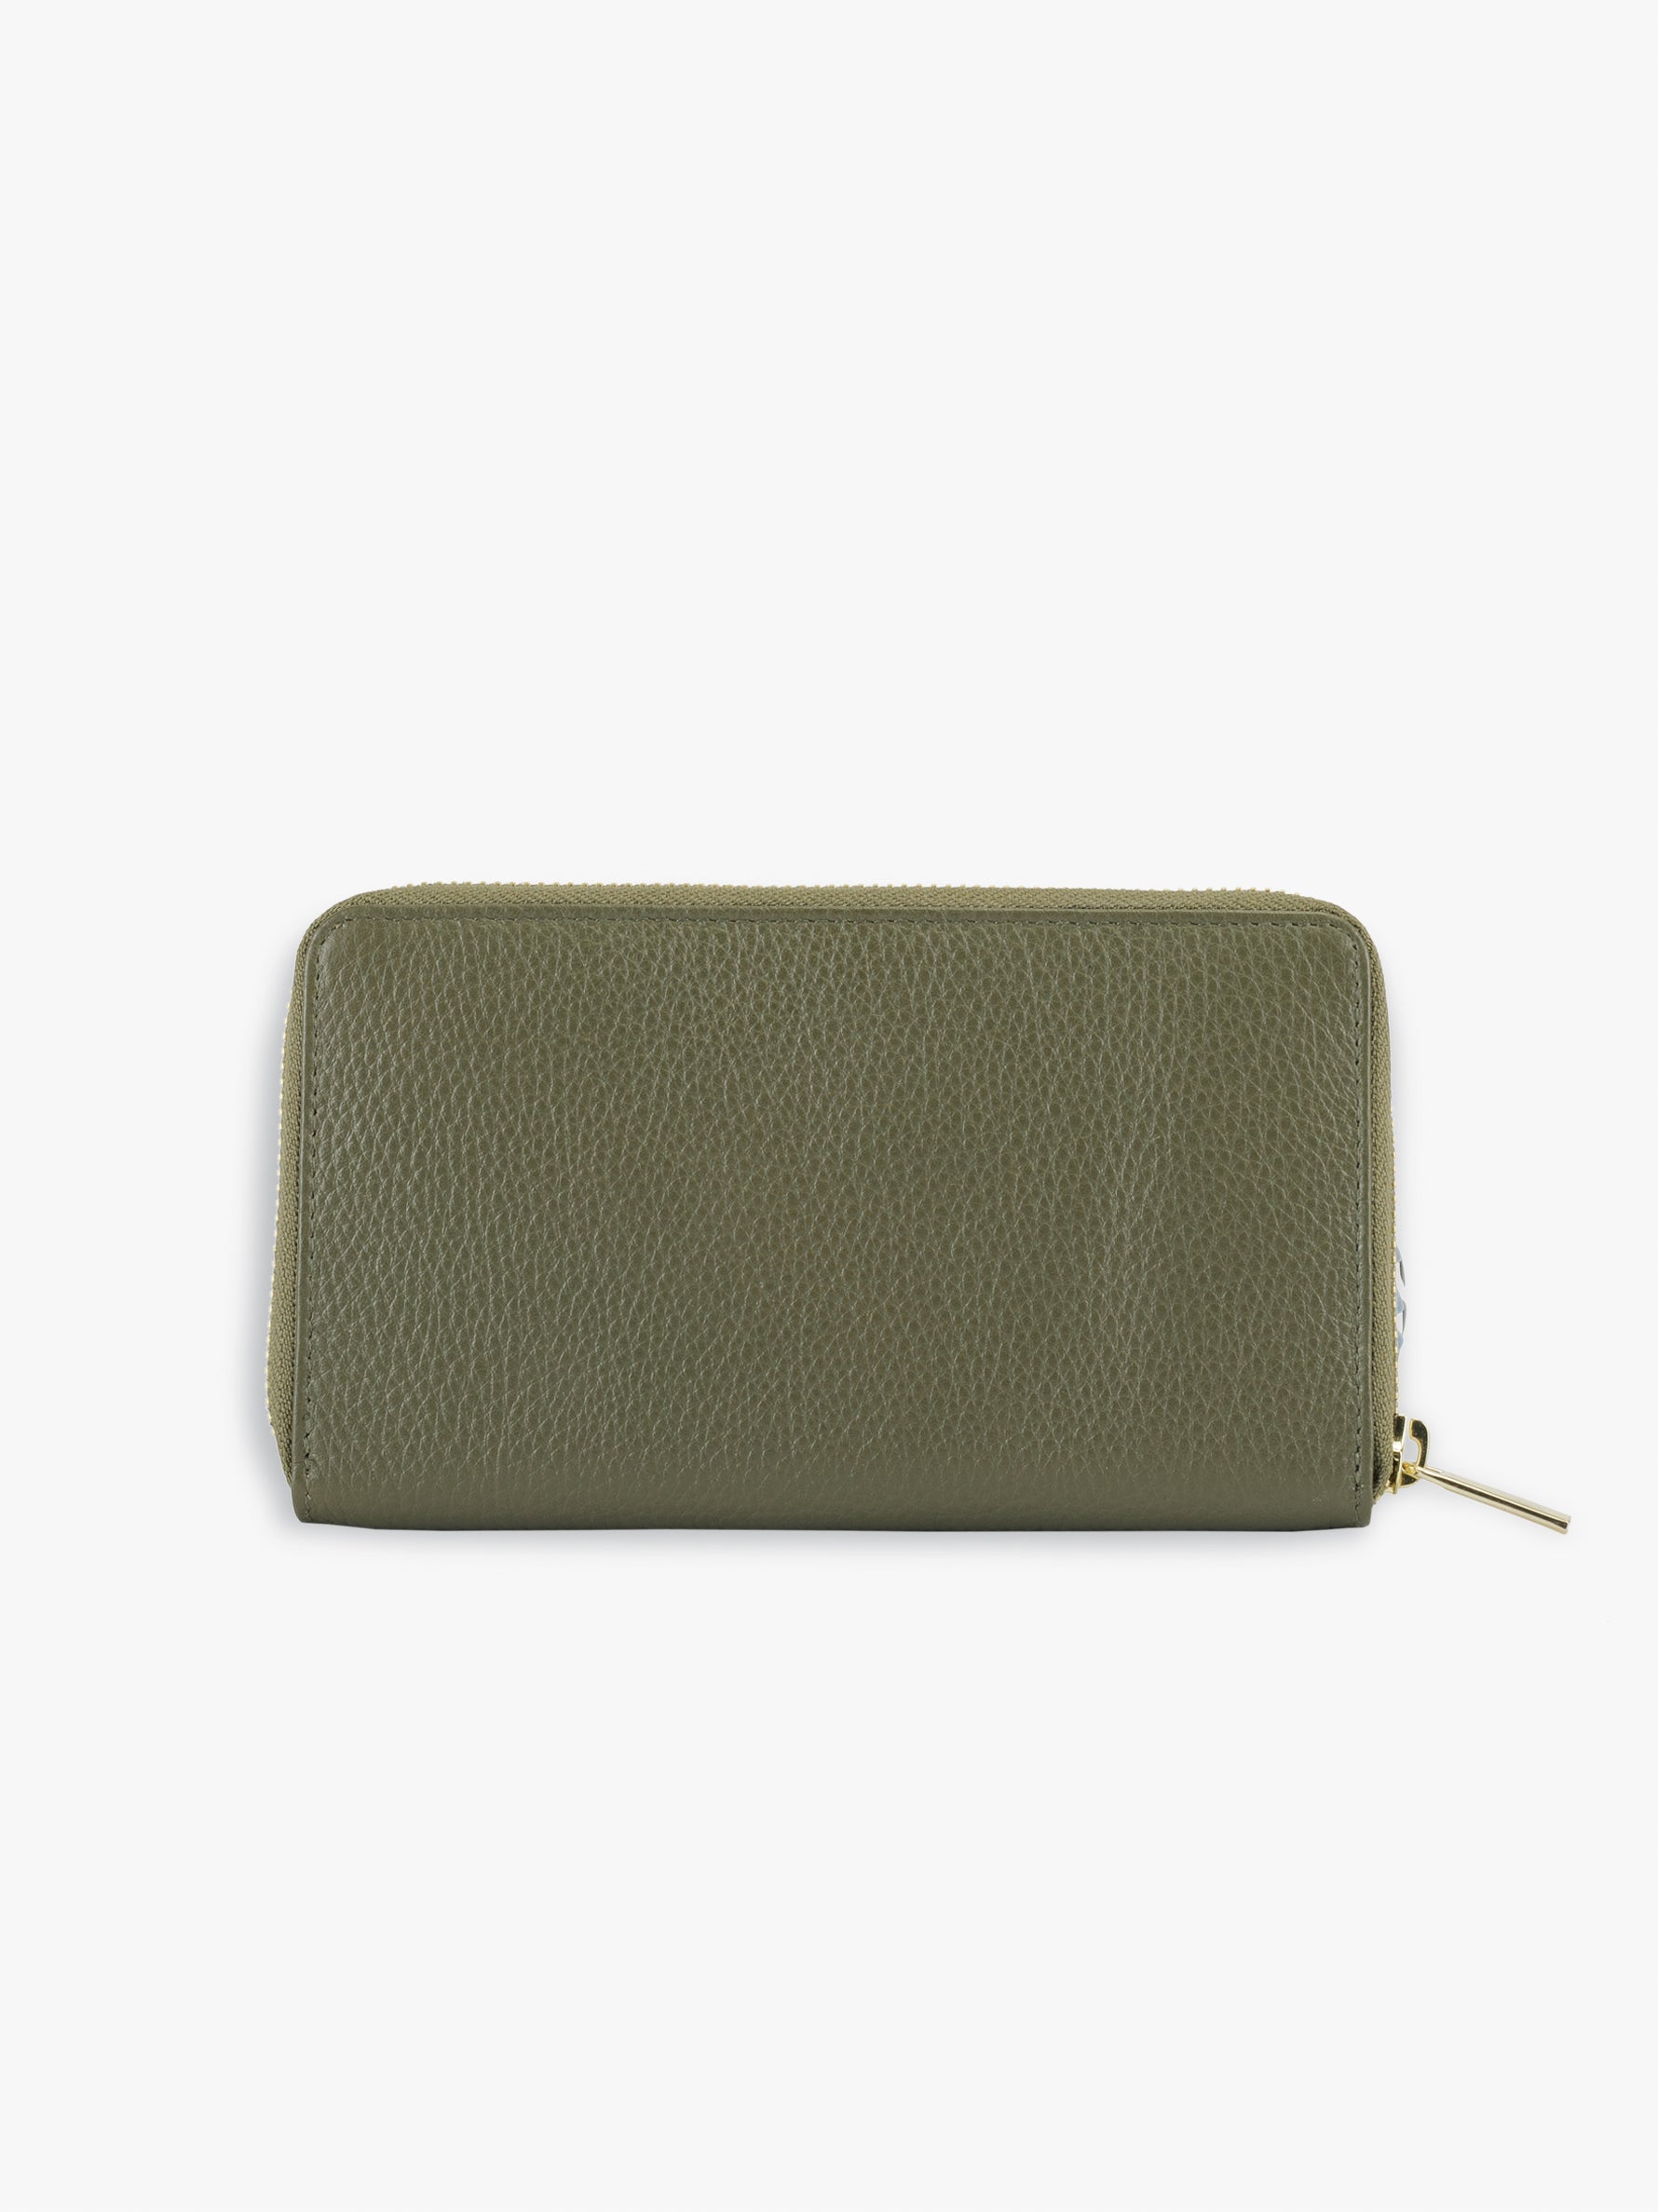 Handcrafted genuine leather classic wallet for women Olive Green